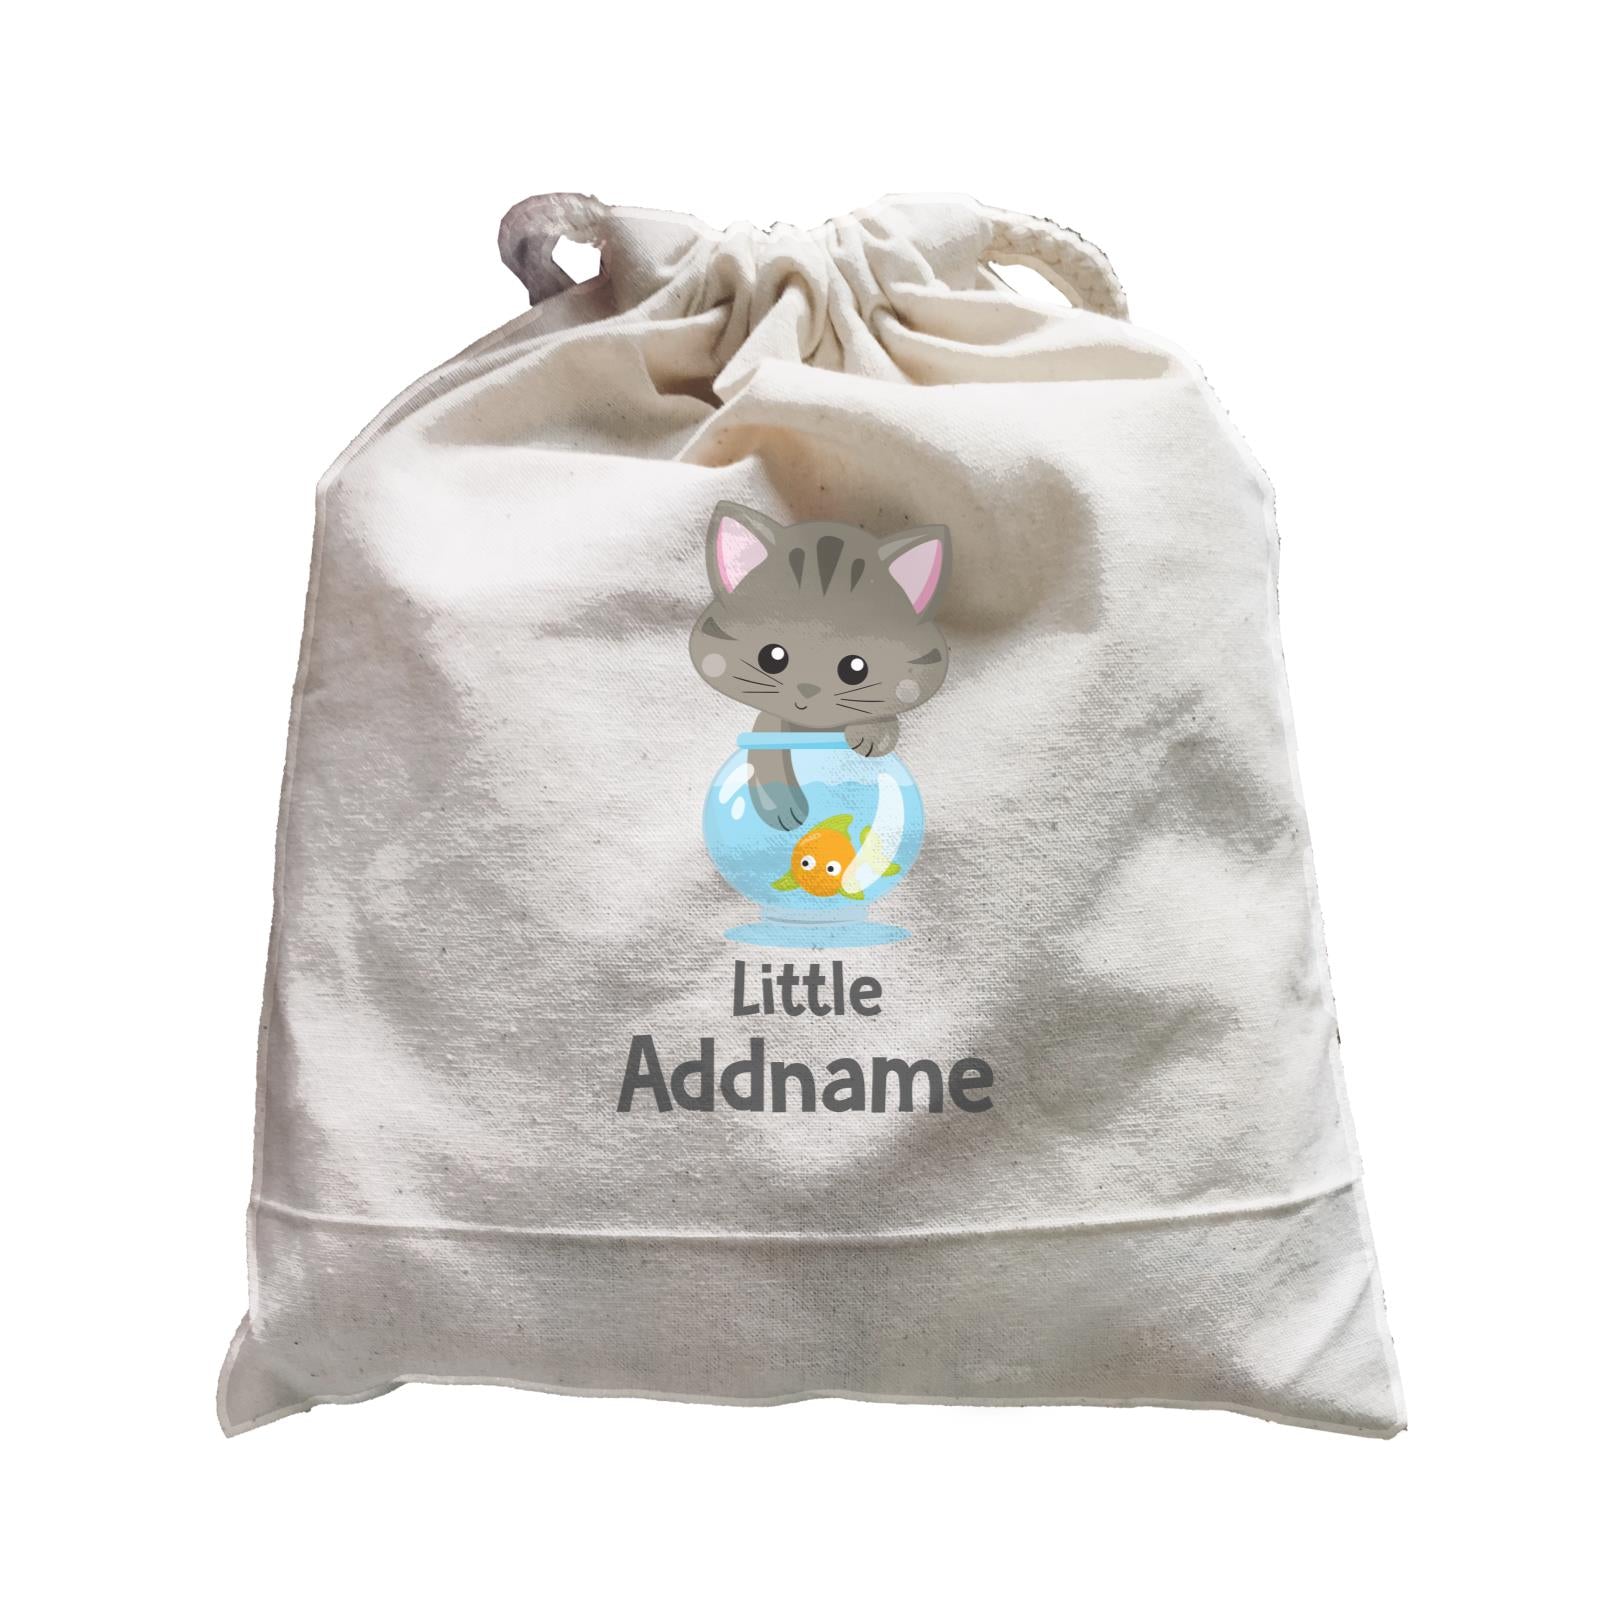 Adorable Cats Grey Cat Playing With Fish Bowl Little Addname Satchel